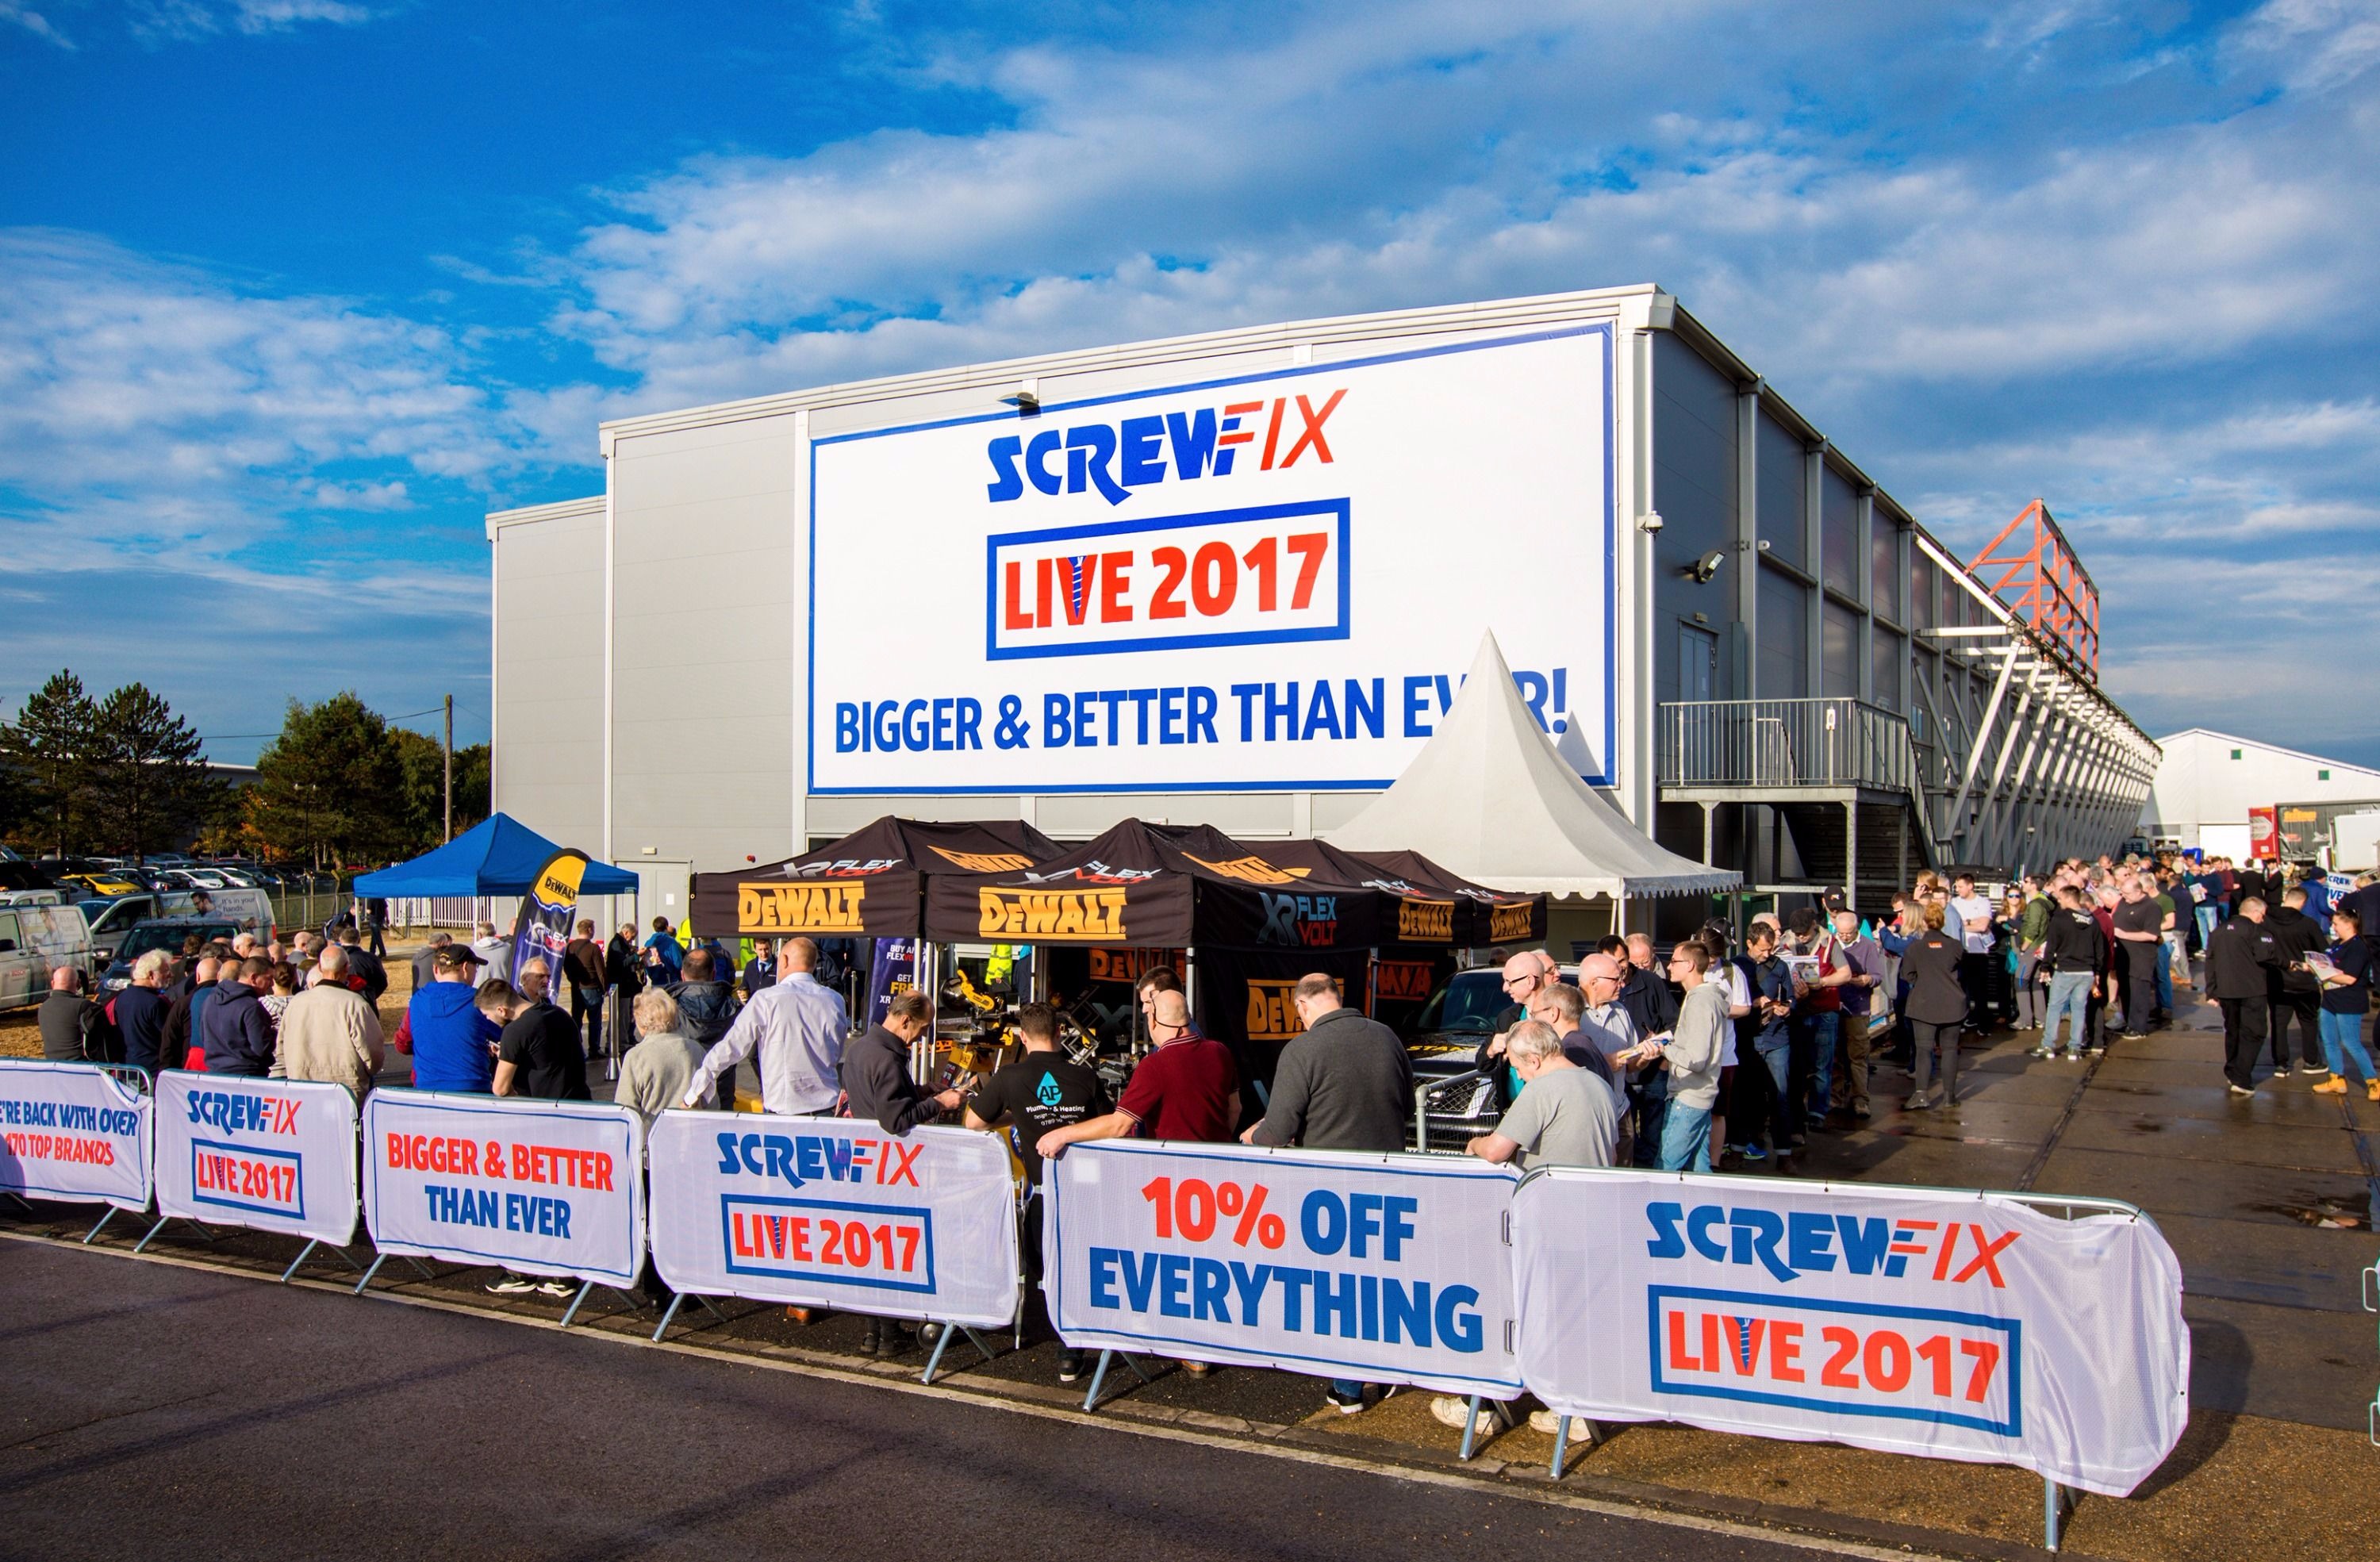 Another successful record-breaking exhibition for Screwfix as thousands attend Screwfix Live 2017